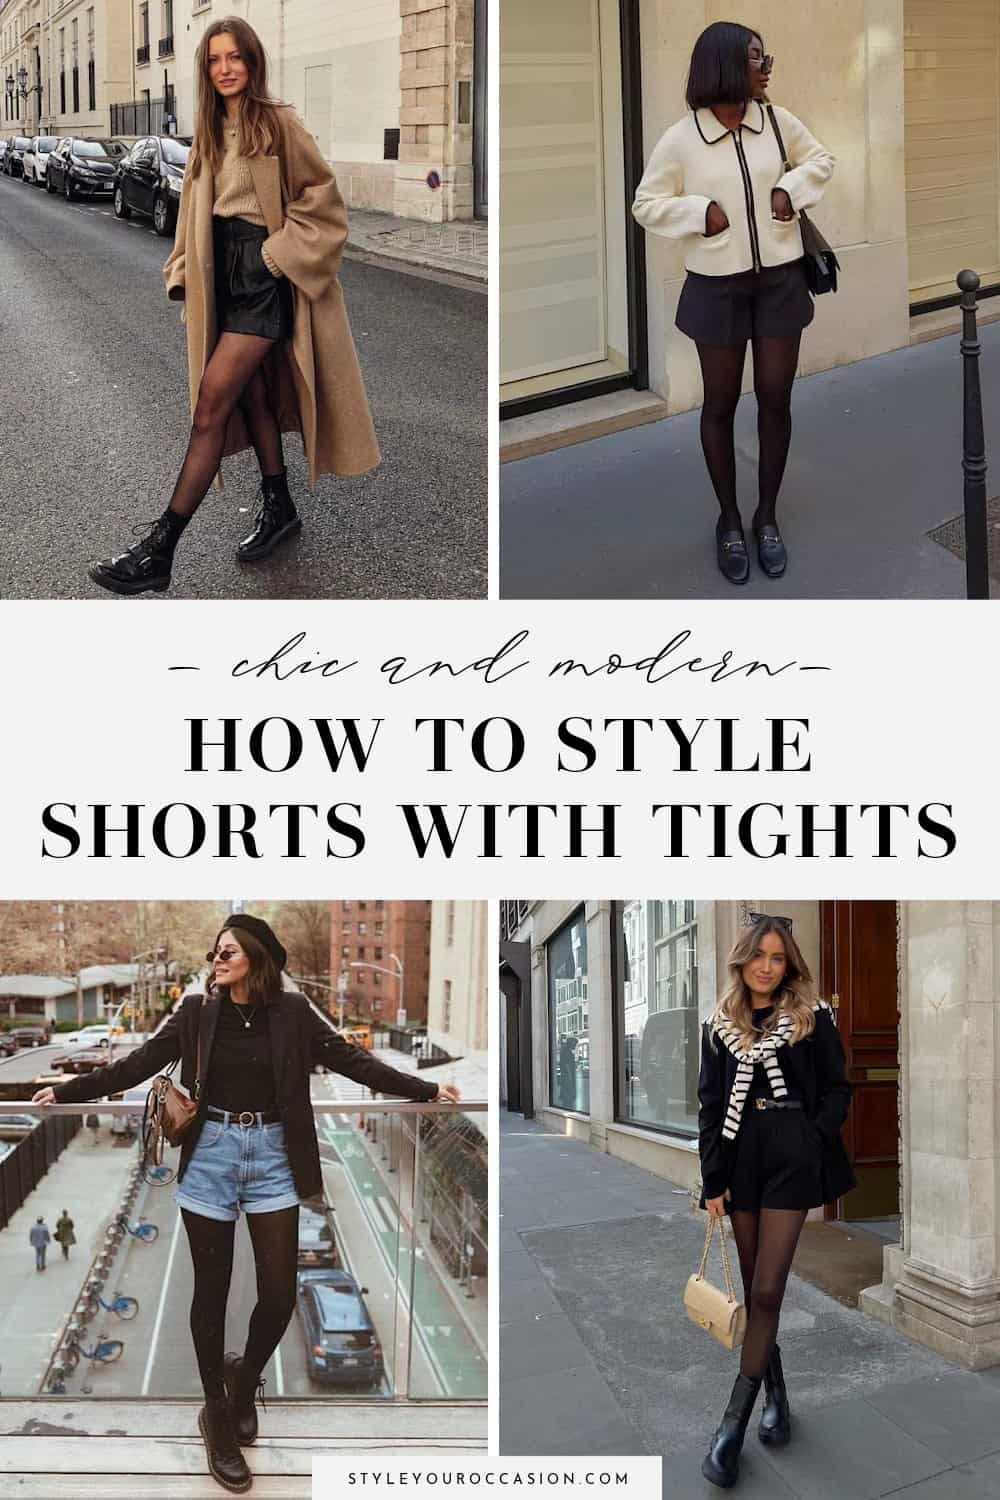 How To Style Shorts with Tights + 15 Chic Outfits